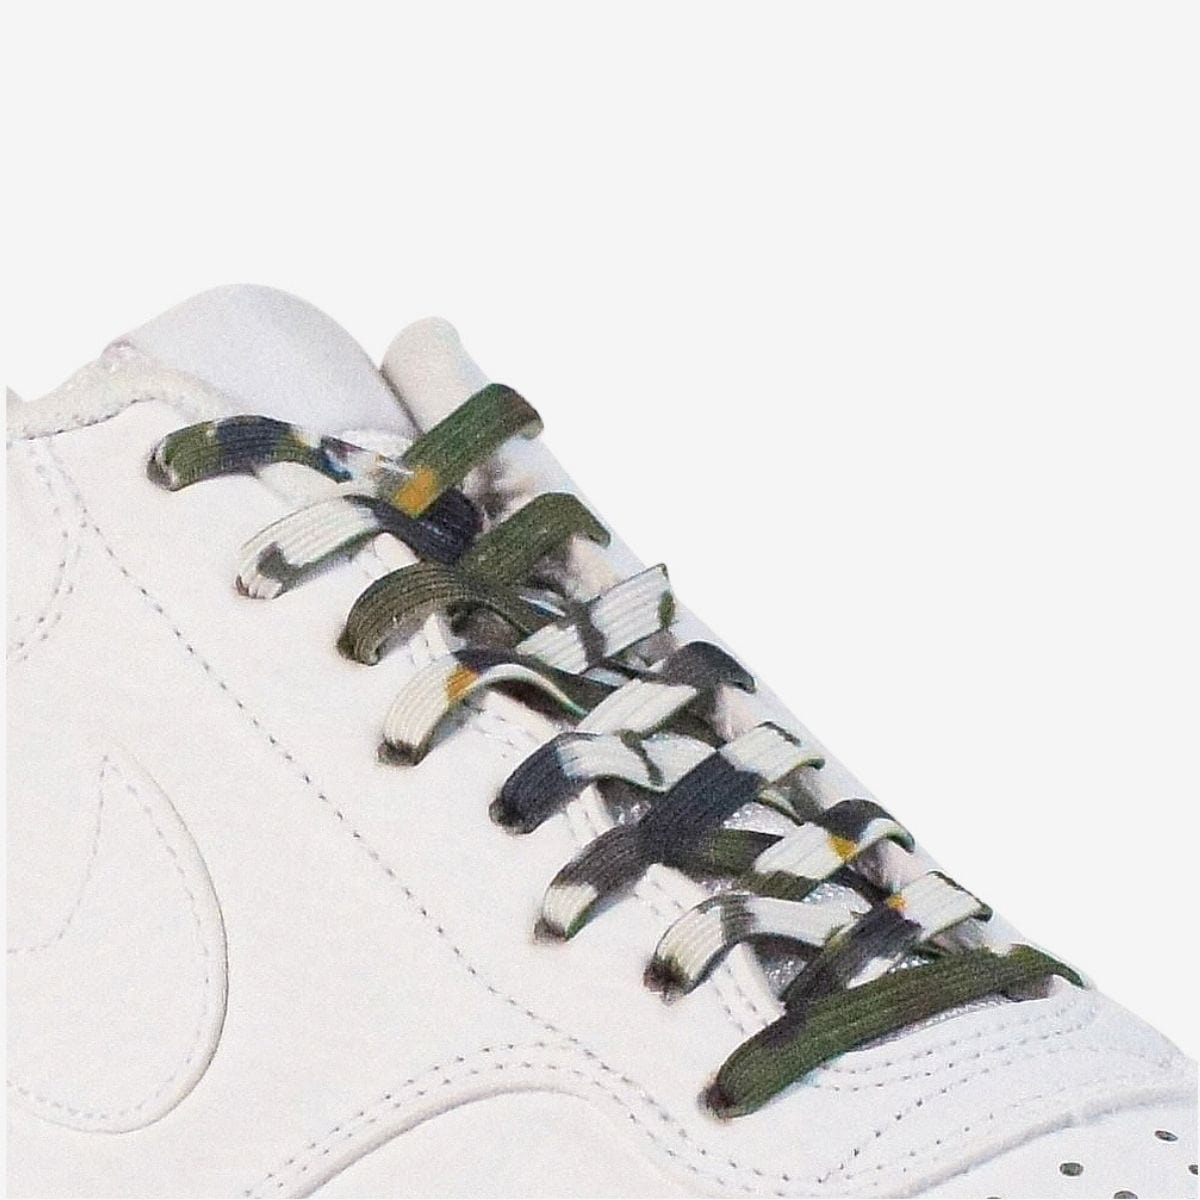 different-ways-to-lace-shoes-with-army-green-elastic-shoelaces-on-white-kicks